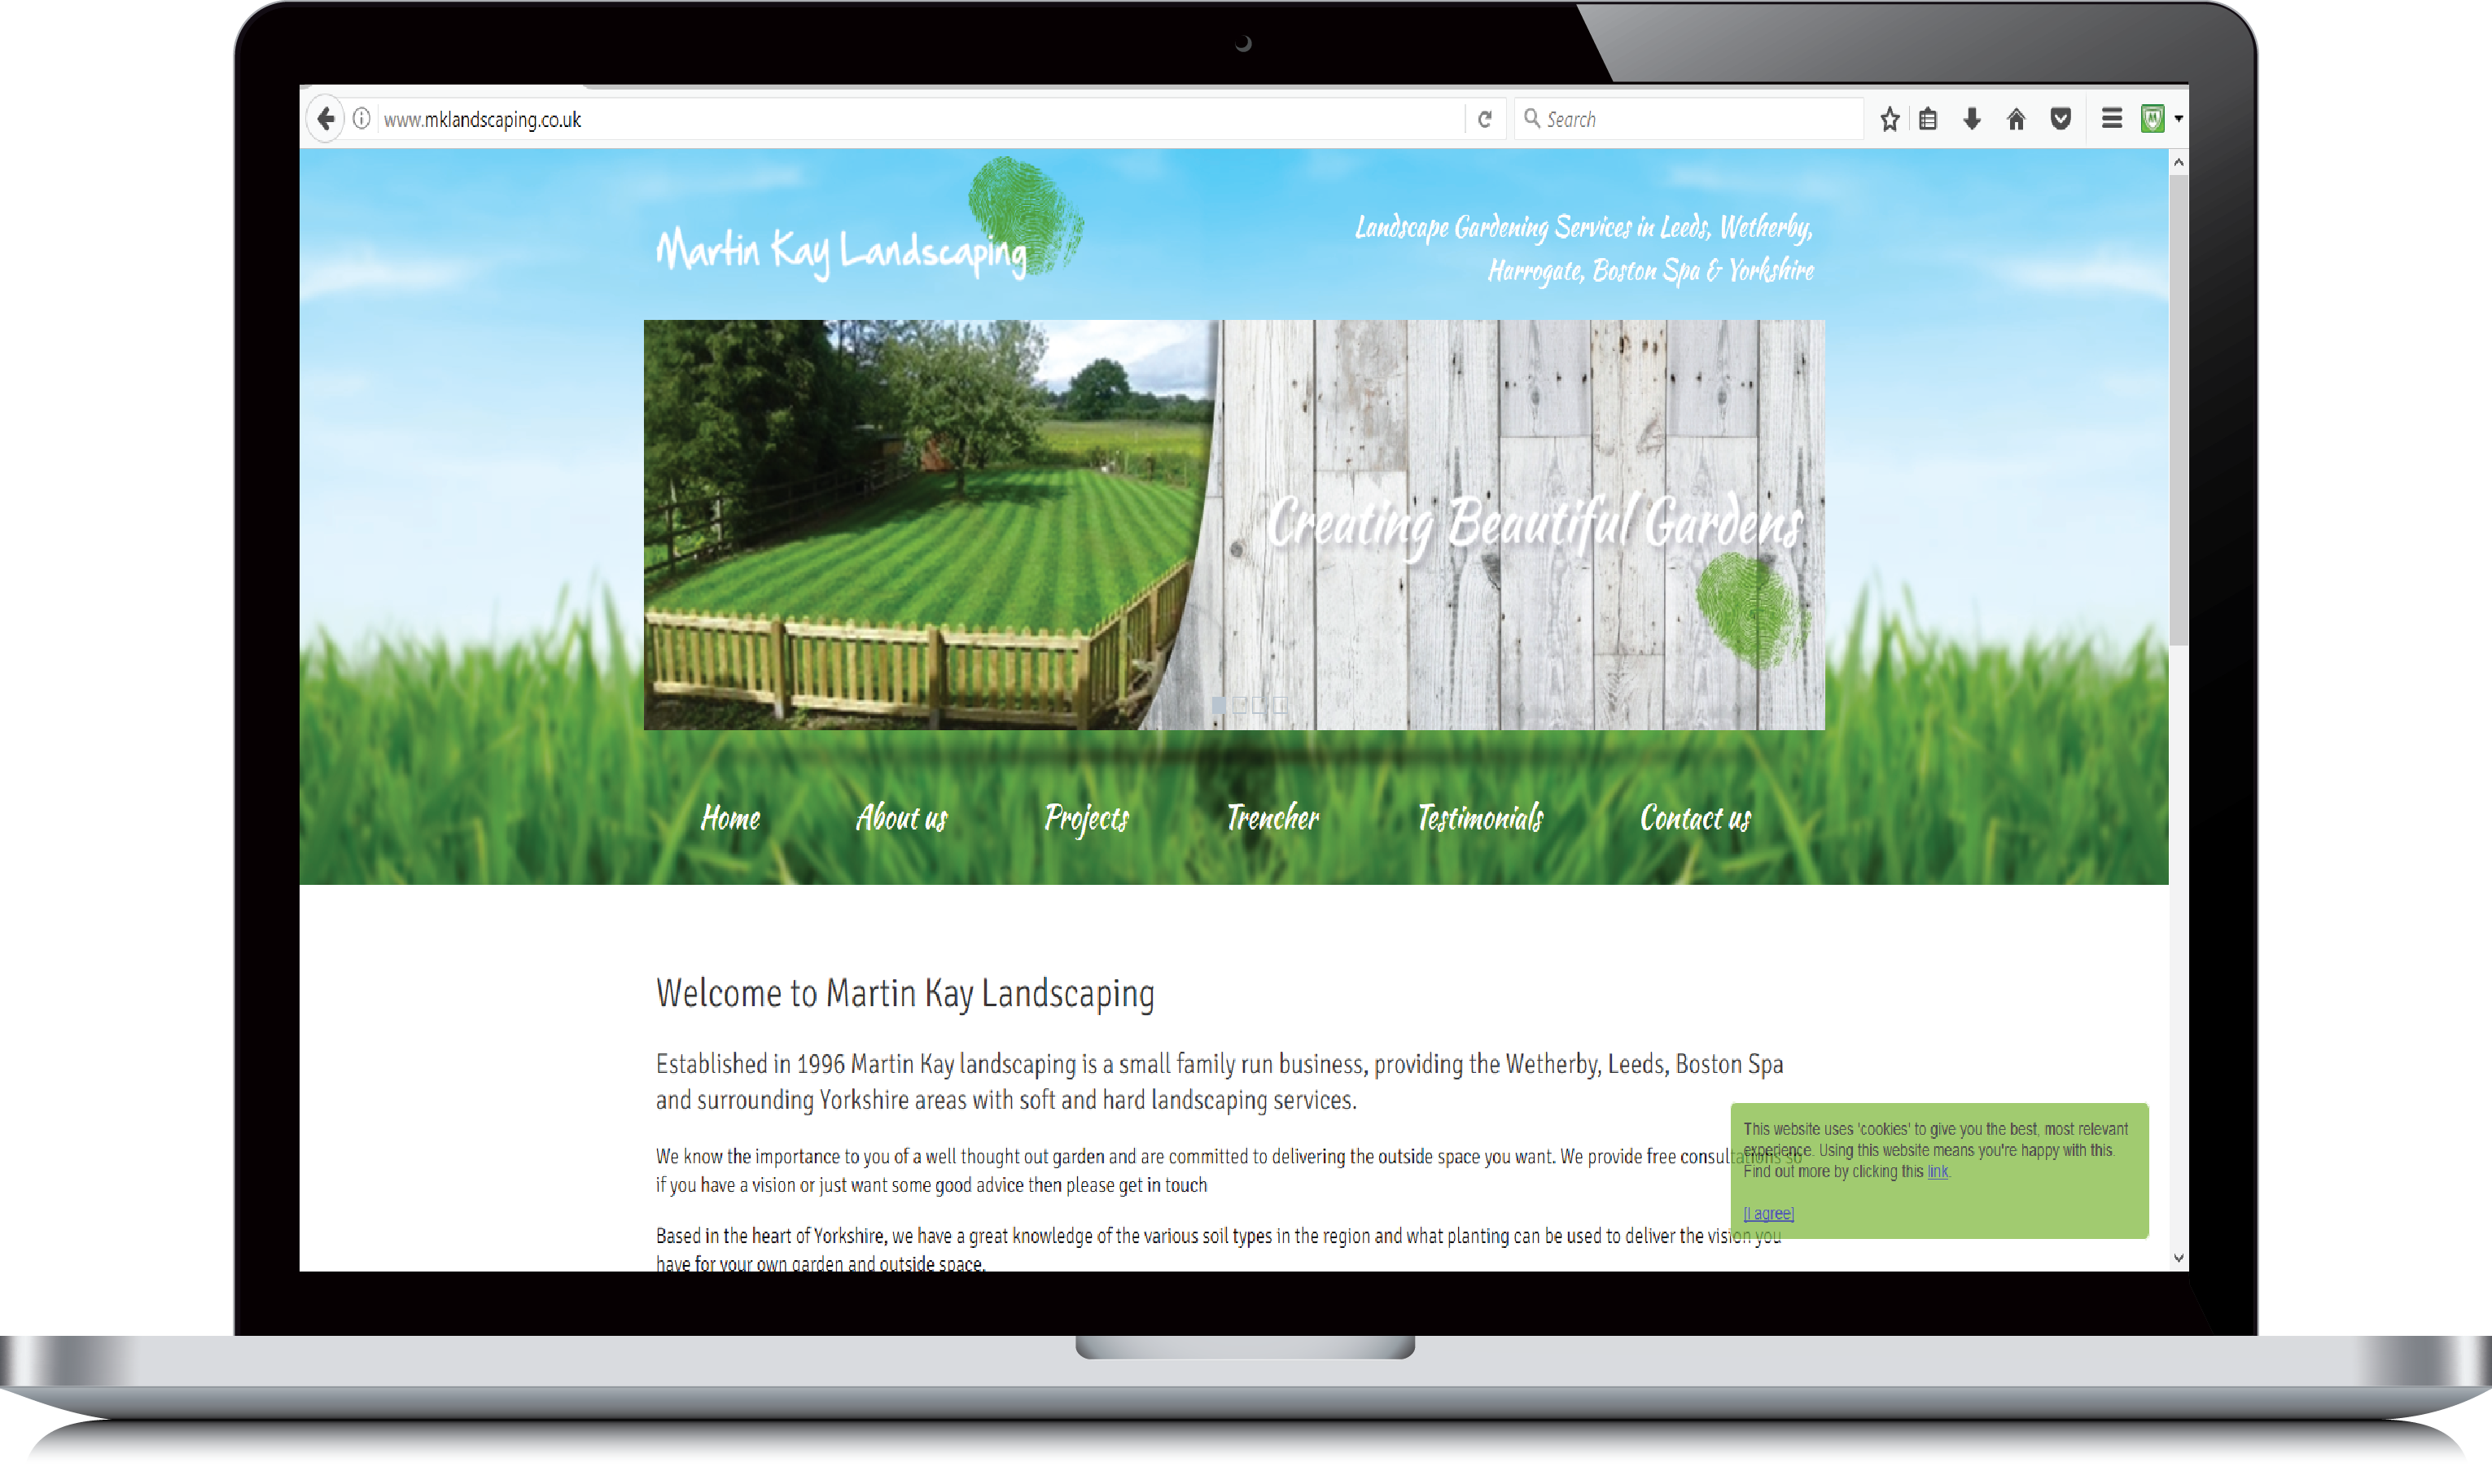 Martin Kay Landscaping website example view